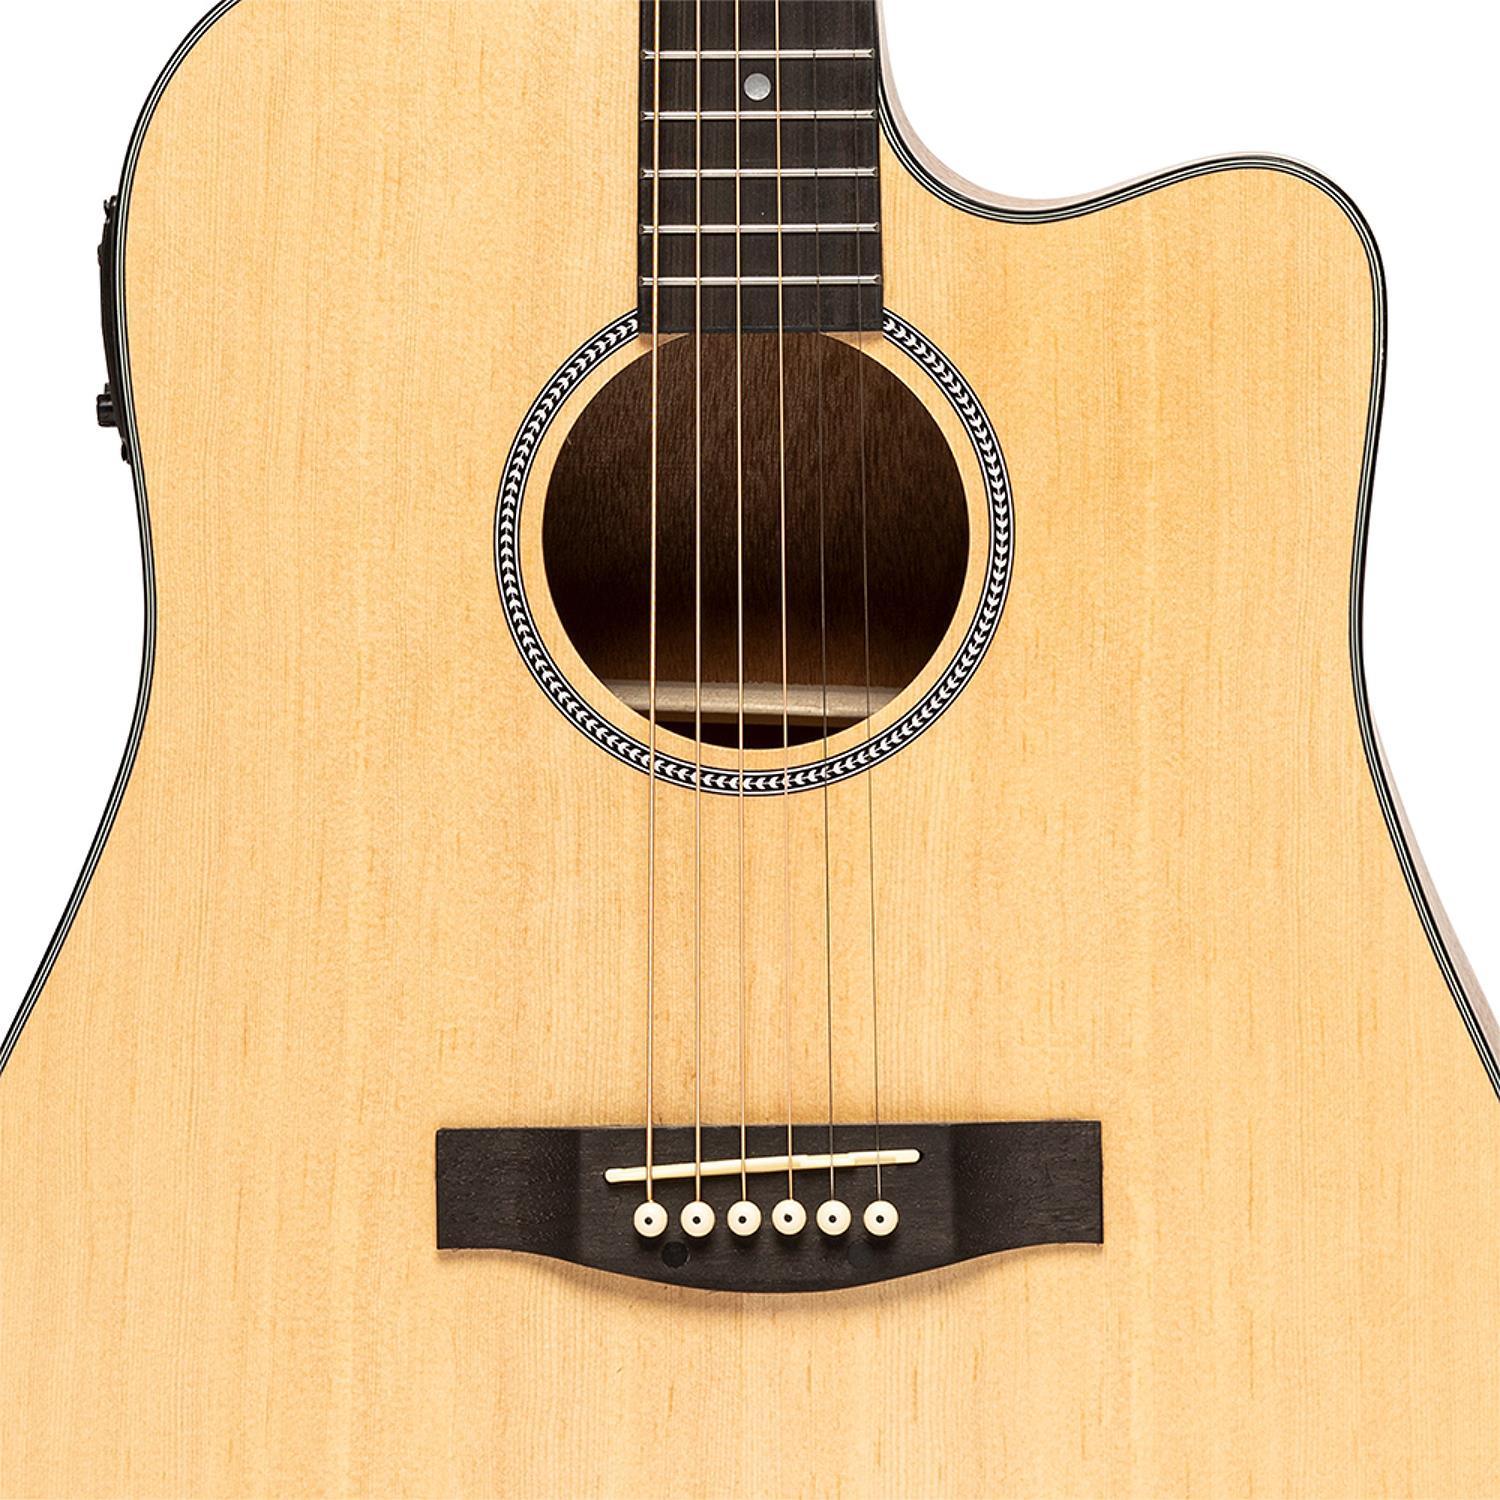 Stagg SA25 DCE Spruce Electro-Acoustic Dreadnought Guitar with Cutaway - DY Pro Audio